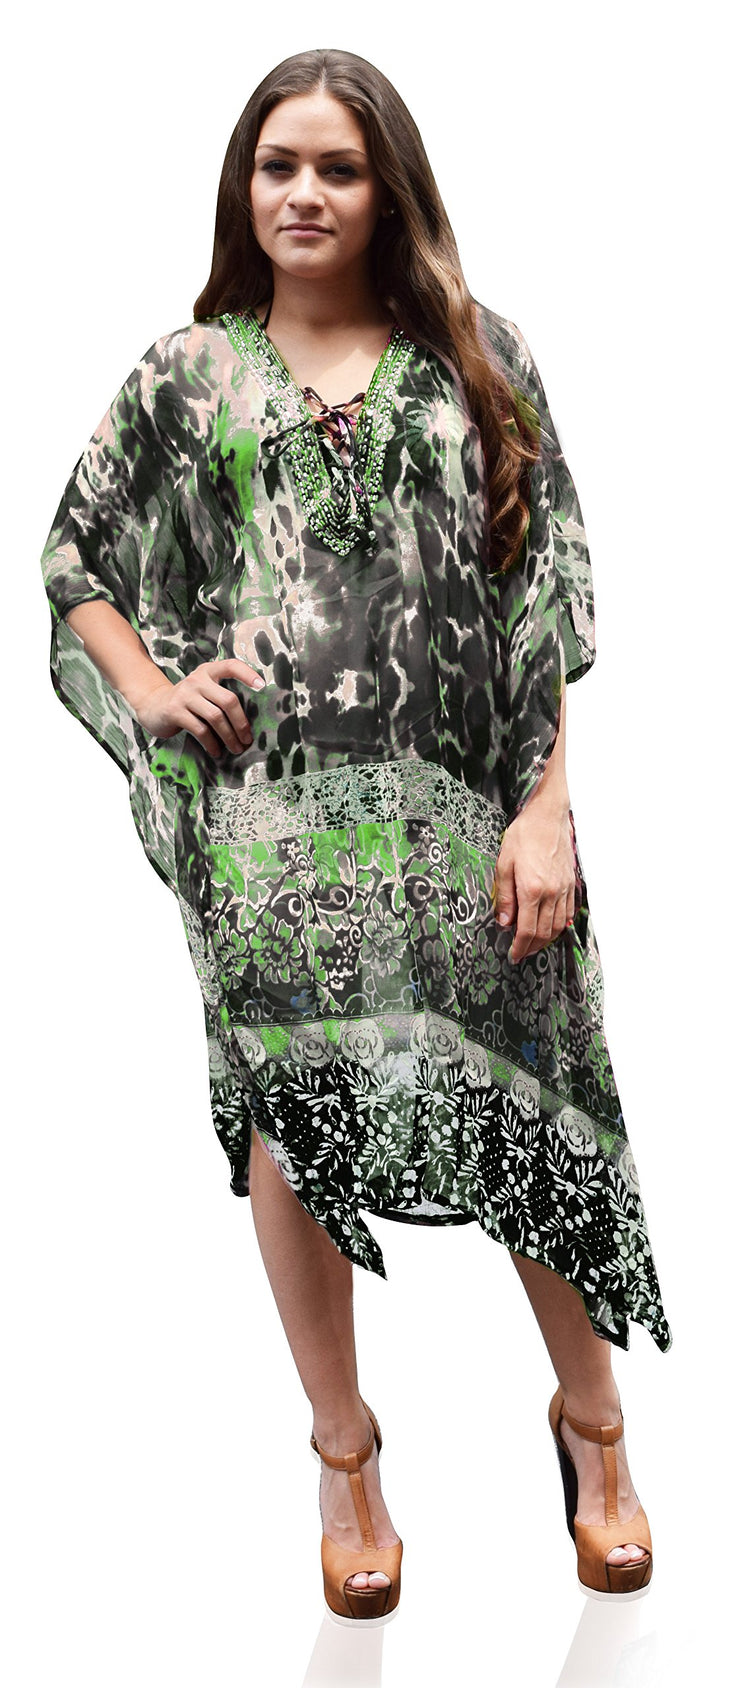 crittendenwayapartments Bohemian Summer Tunic Beach Cover Up Dress with Embellished Neckline